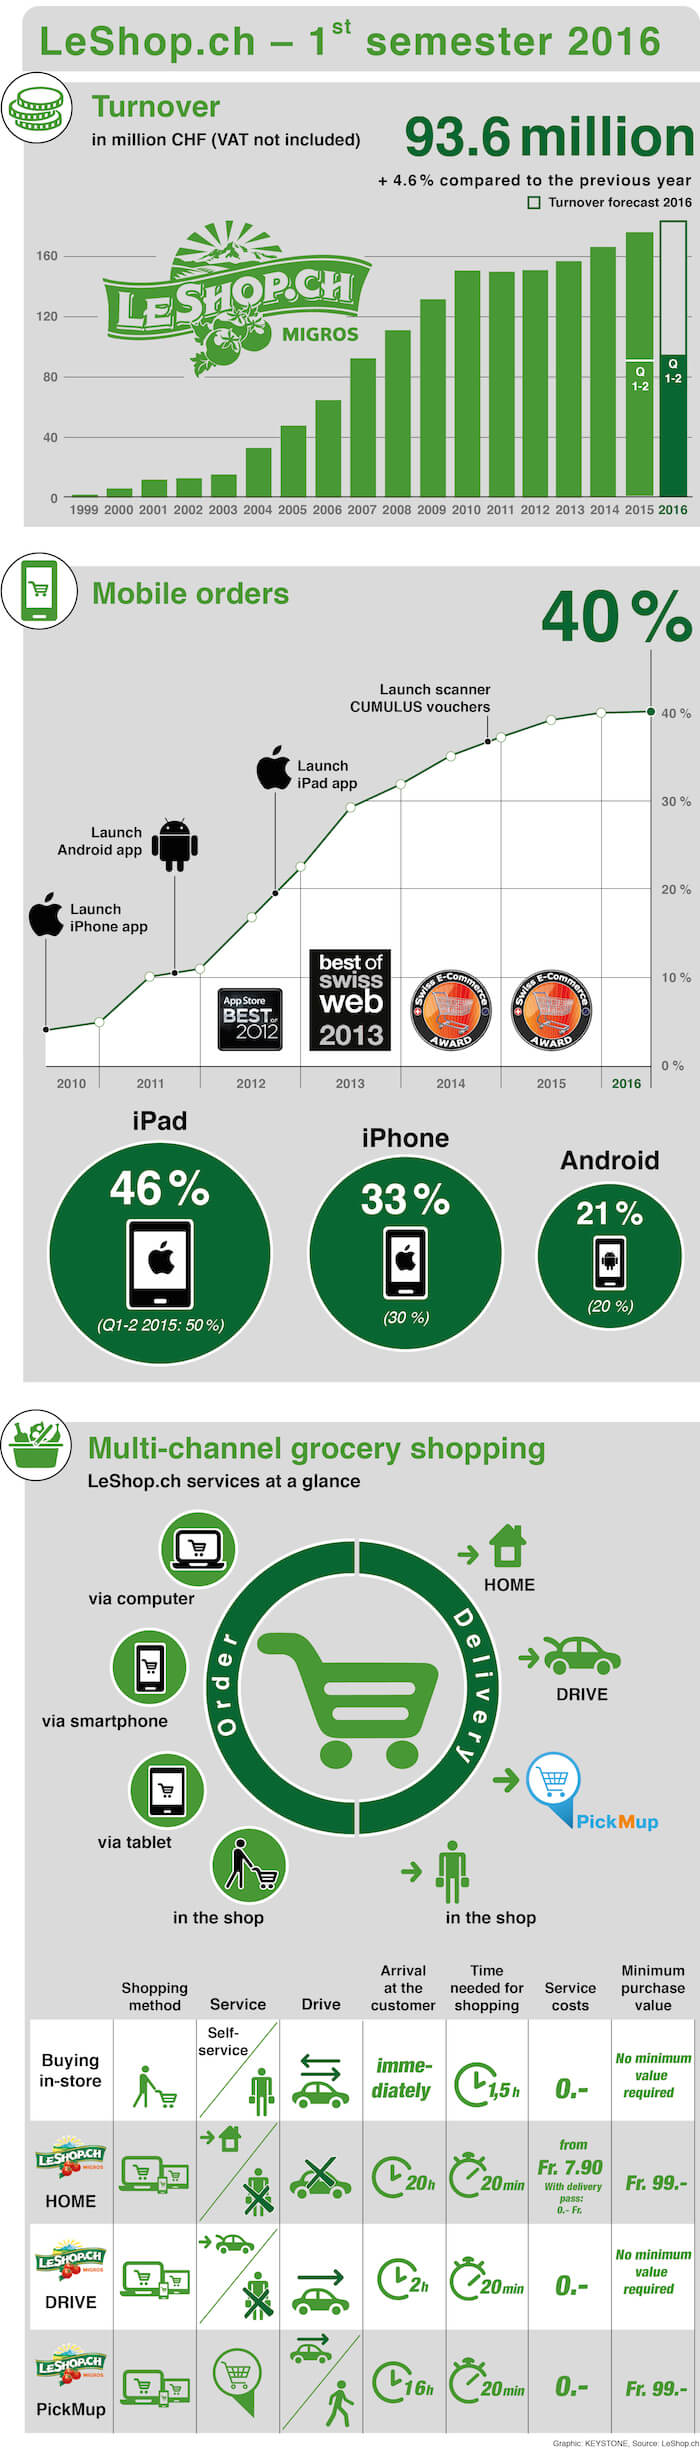 Infographic about Swiss online supermarket LeShop